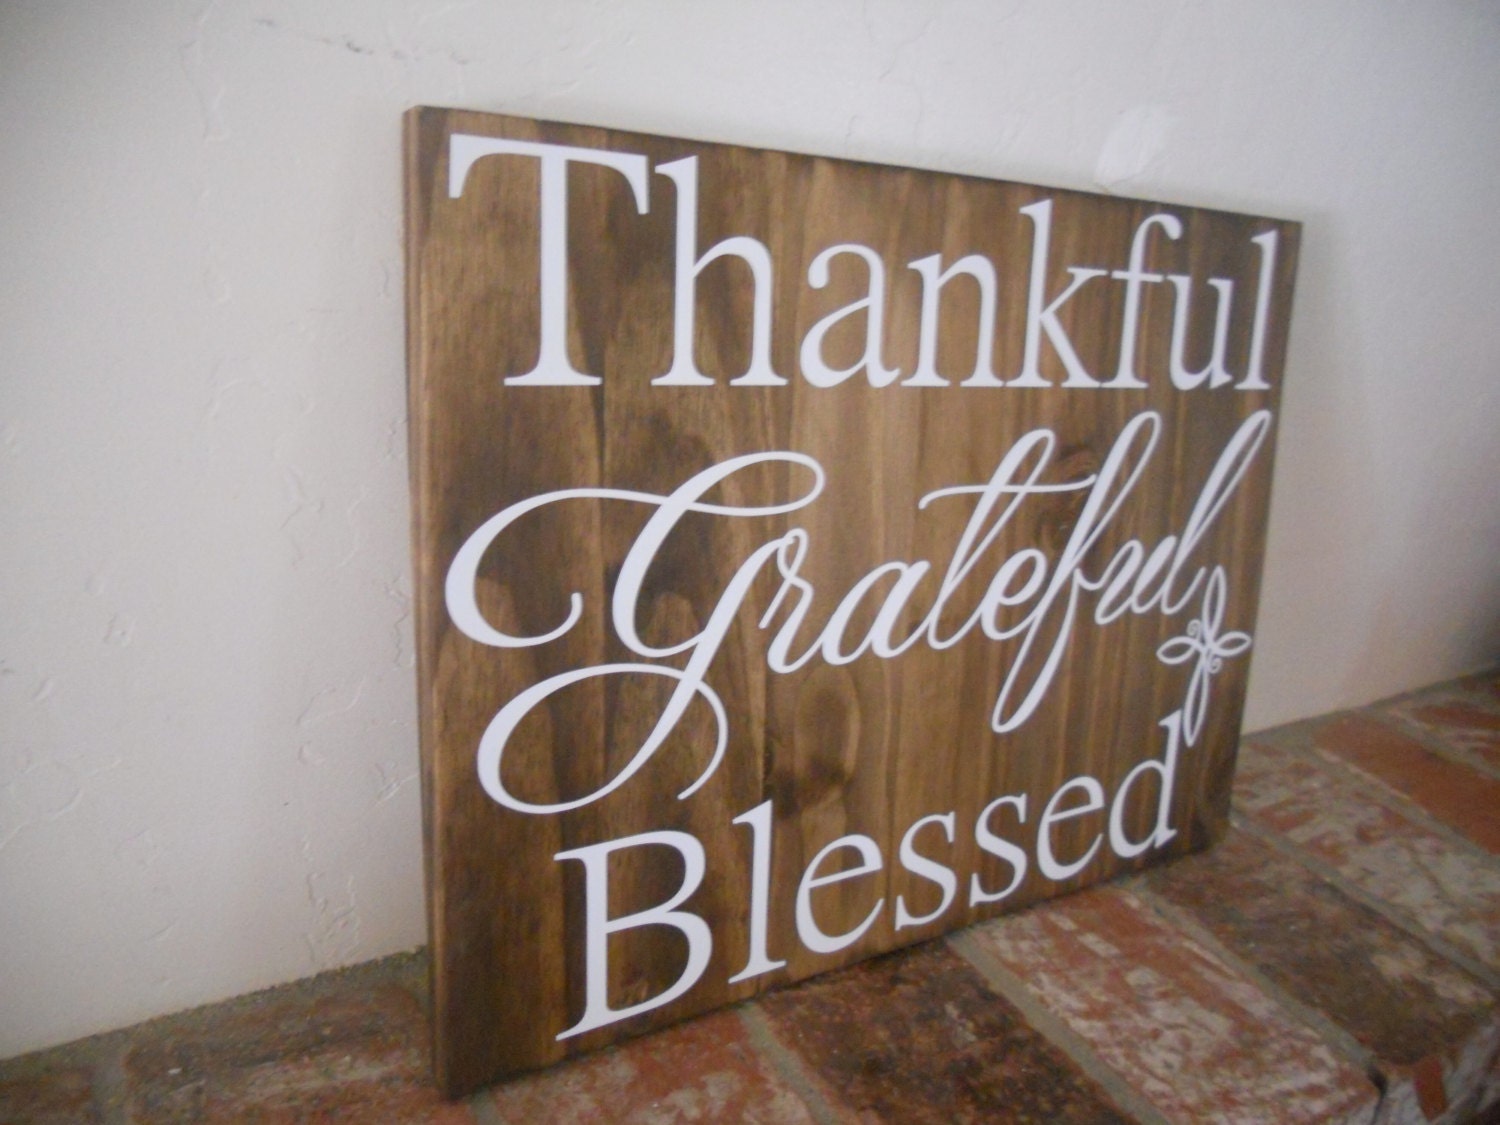 Thankful Grateful Blessed Wooden sign